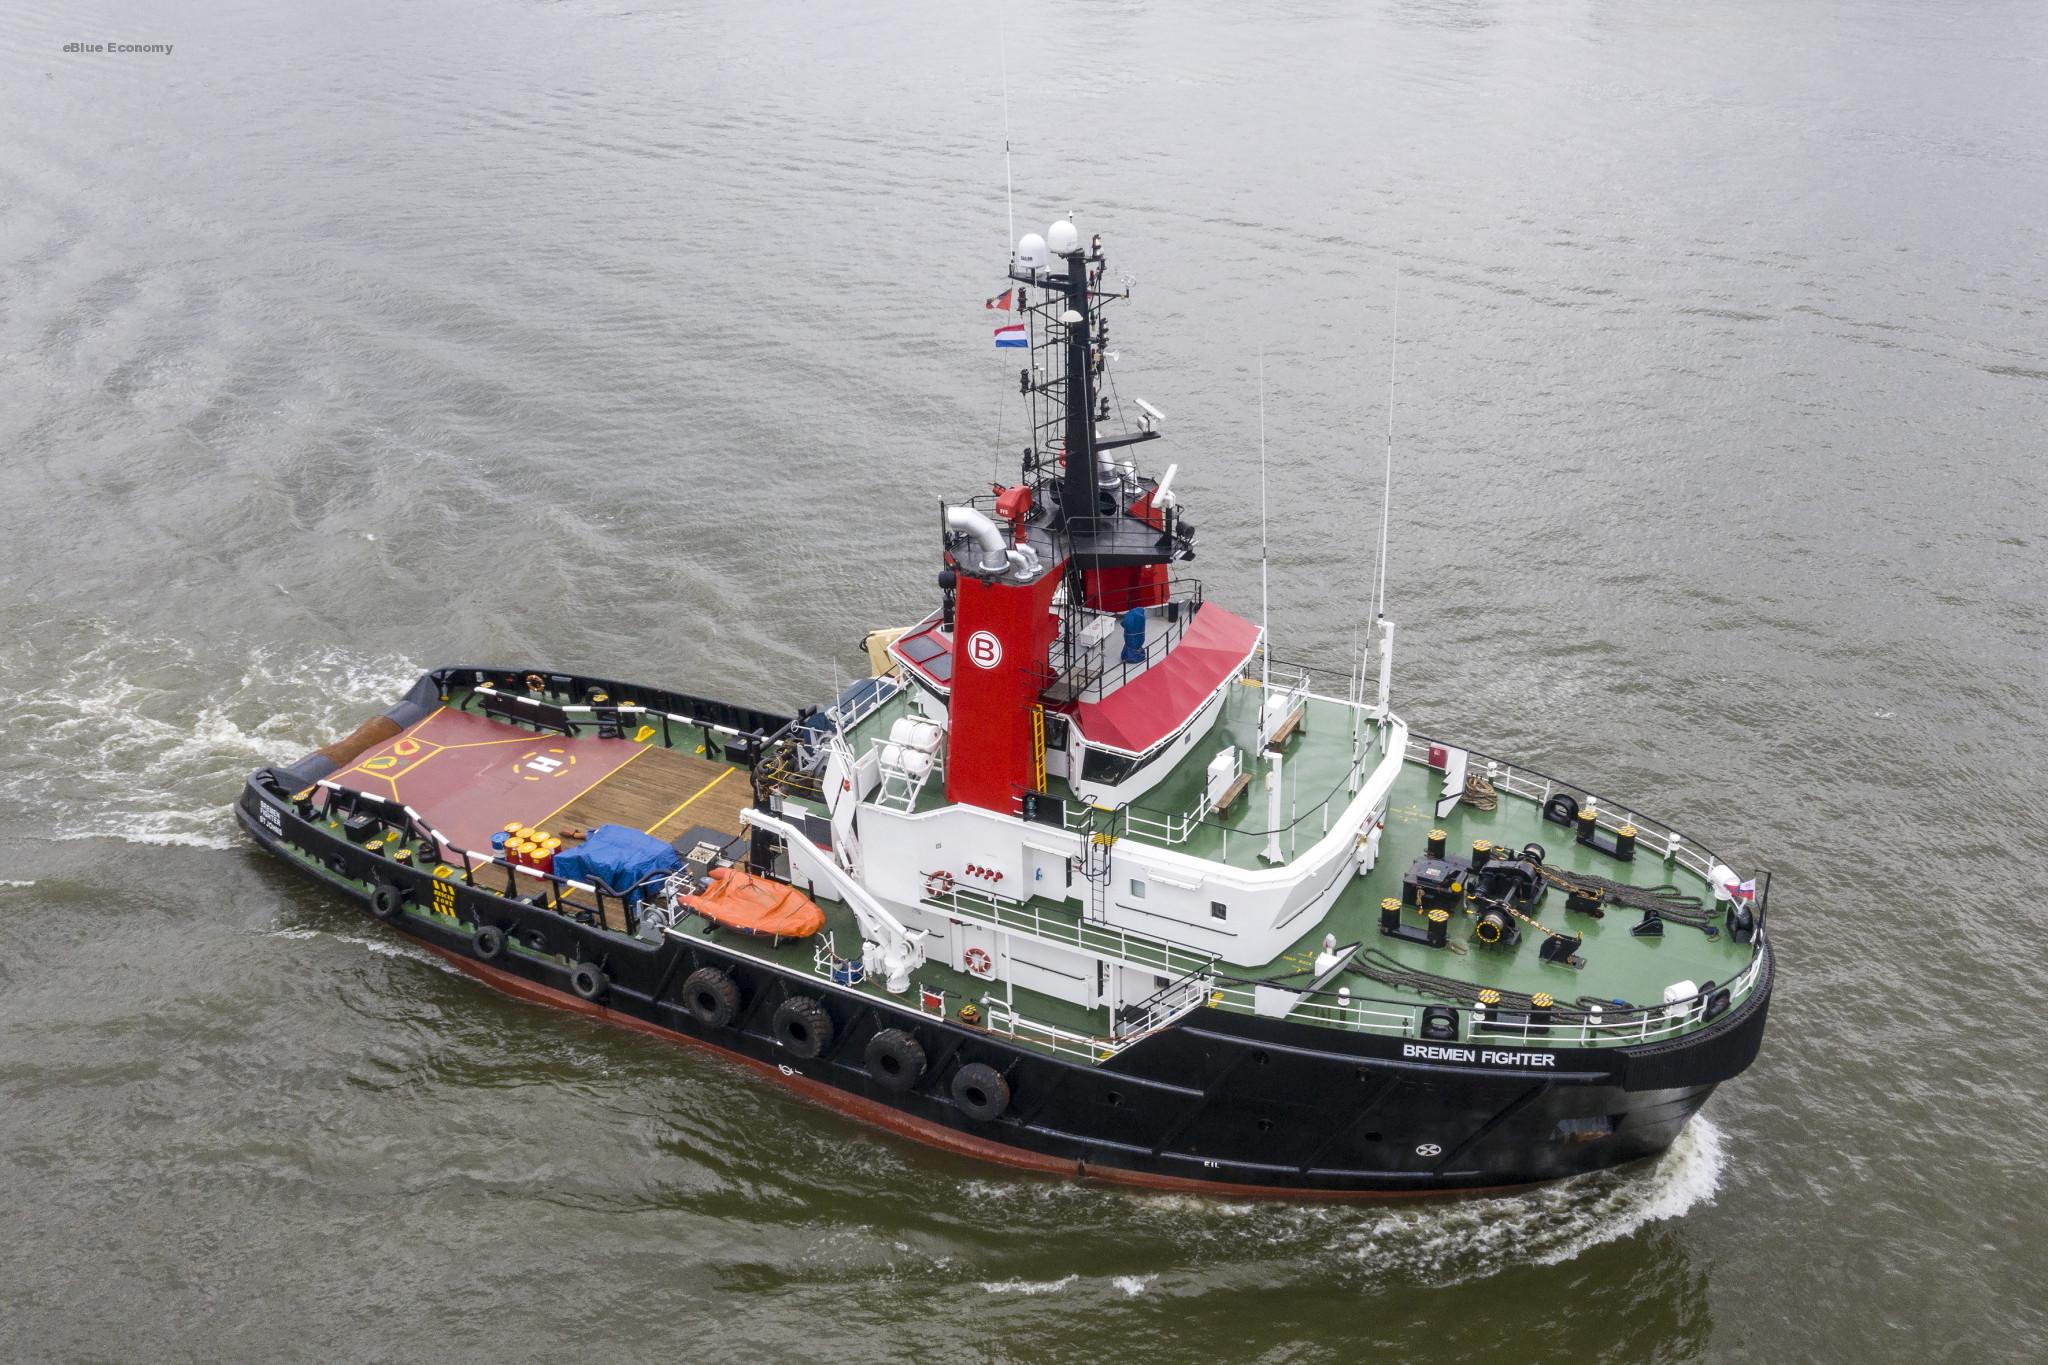 eBlue_economy_ Tugs Towing & Offshore Newsletter 60 2021 PDF